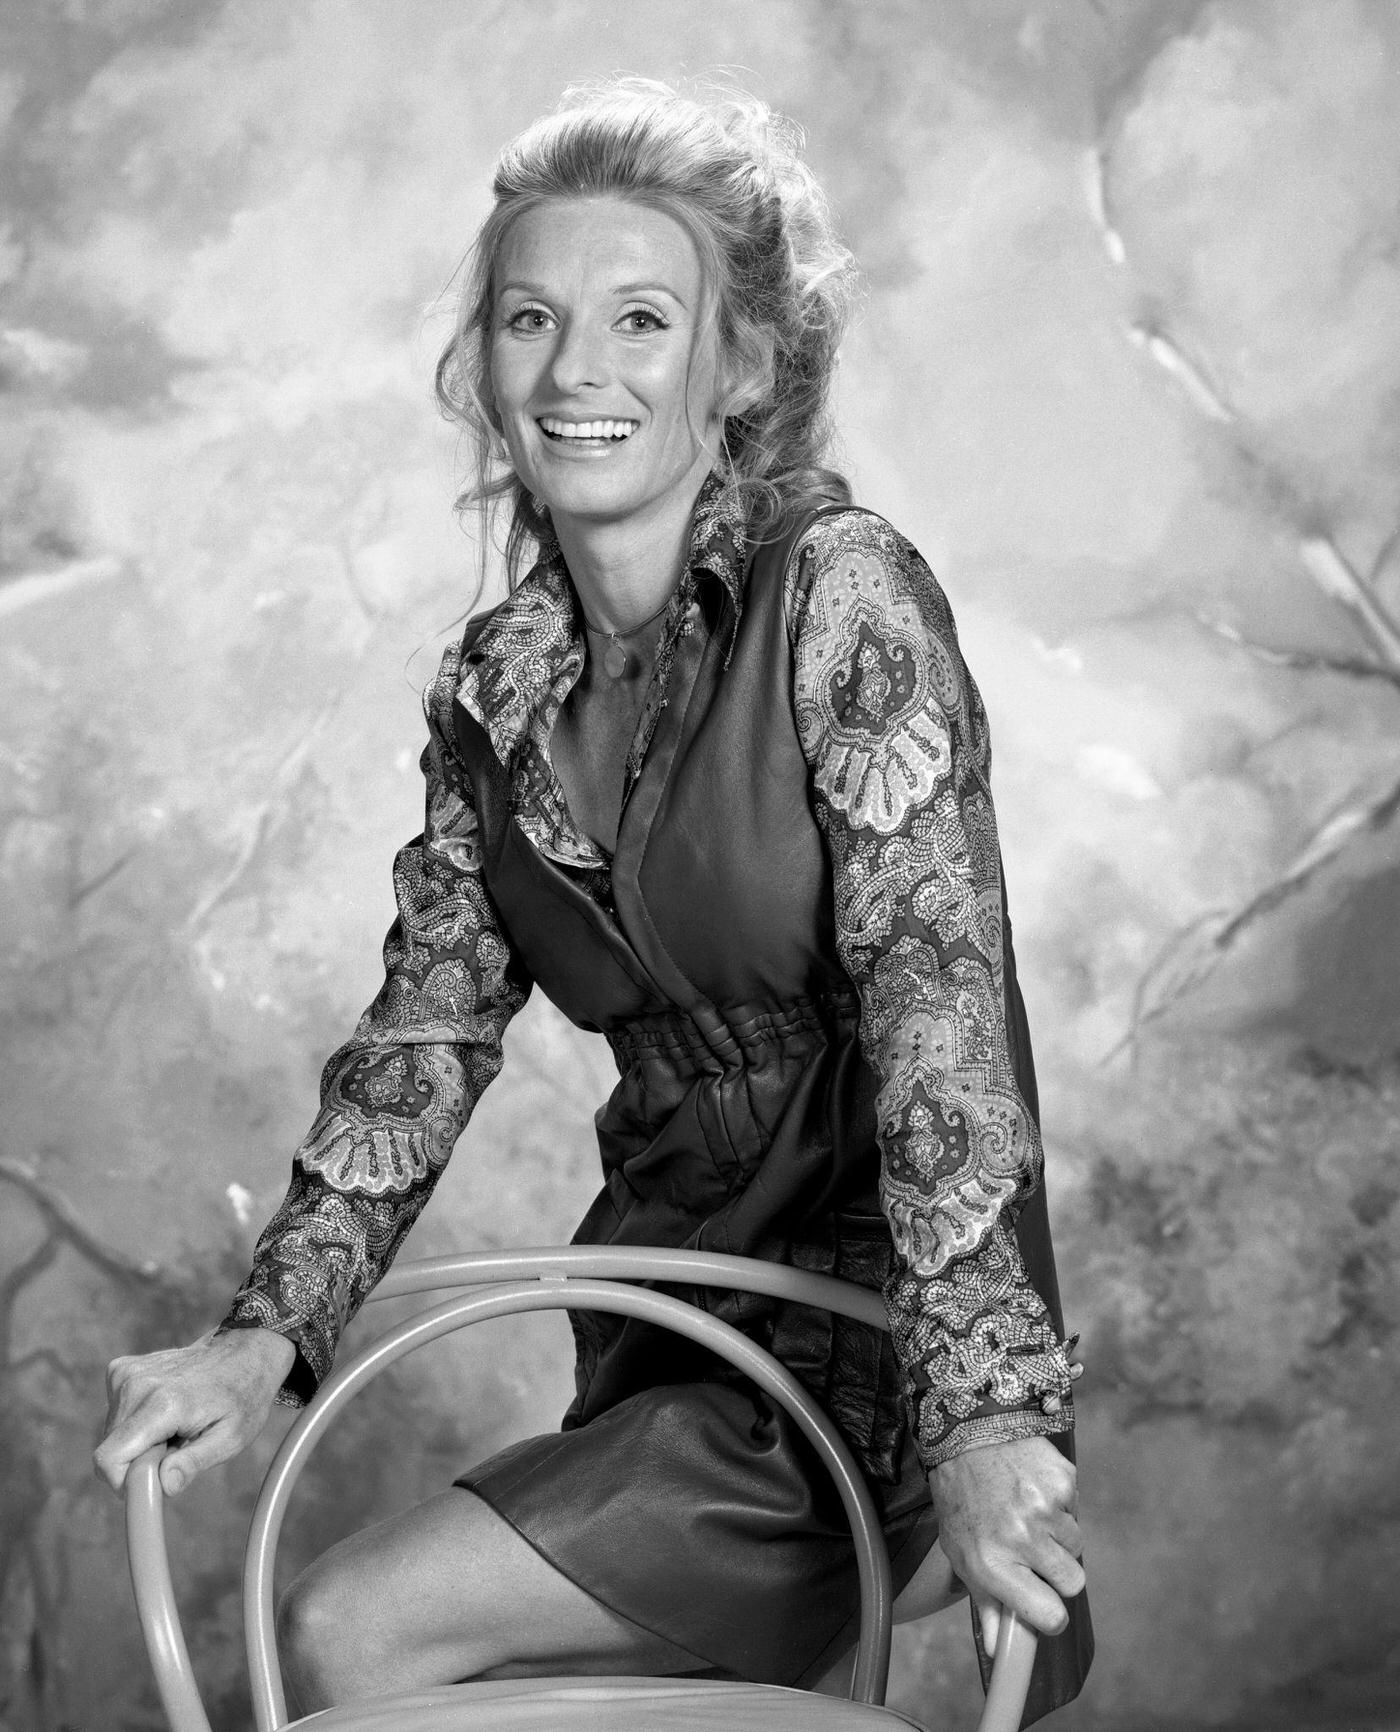 Cloris Leachman: A Glimpse into the Early Years of a Legendary Actress